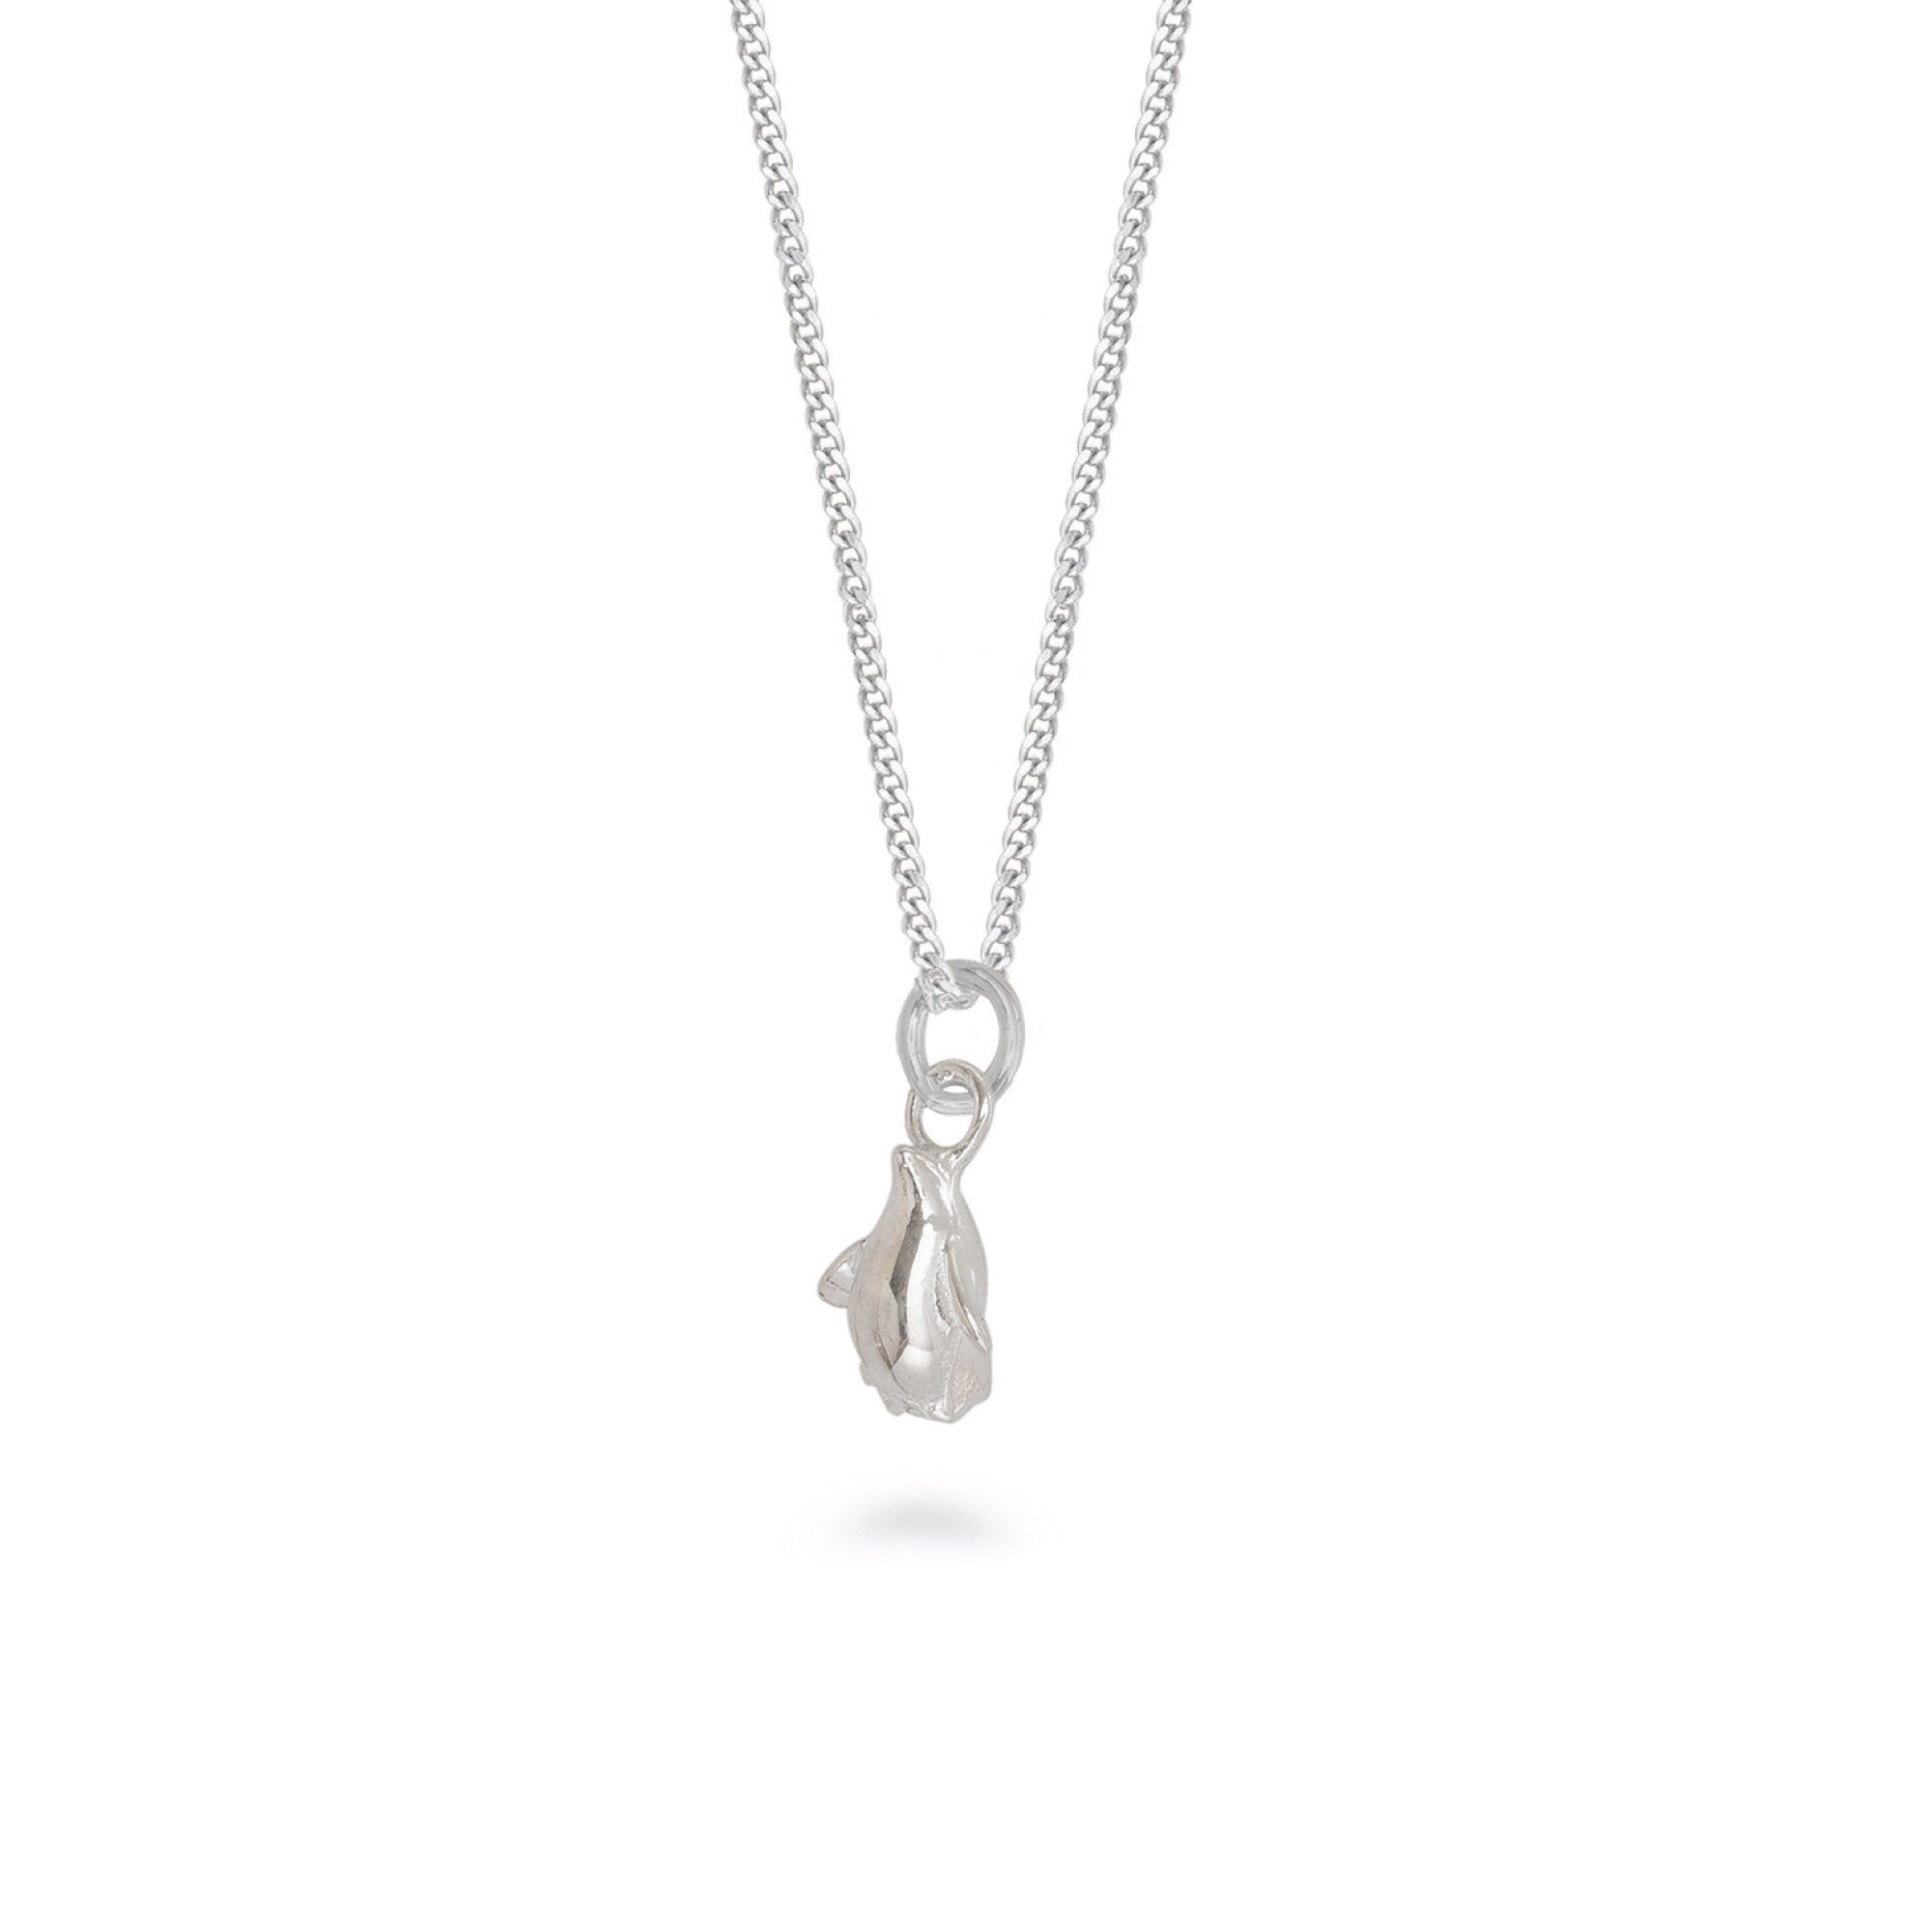 Tiny Penguin Charm Necklace Sterling Silver